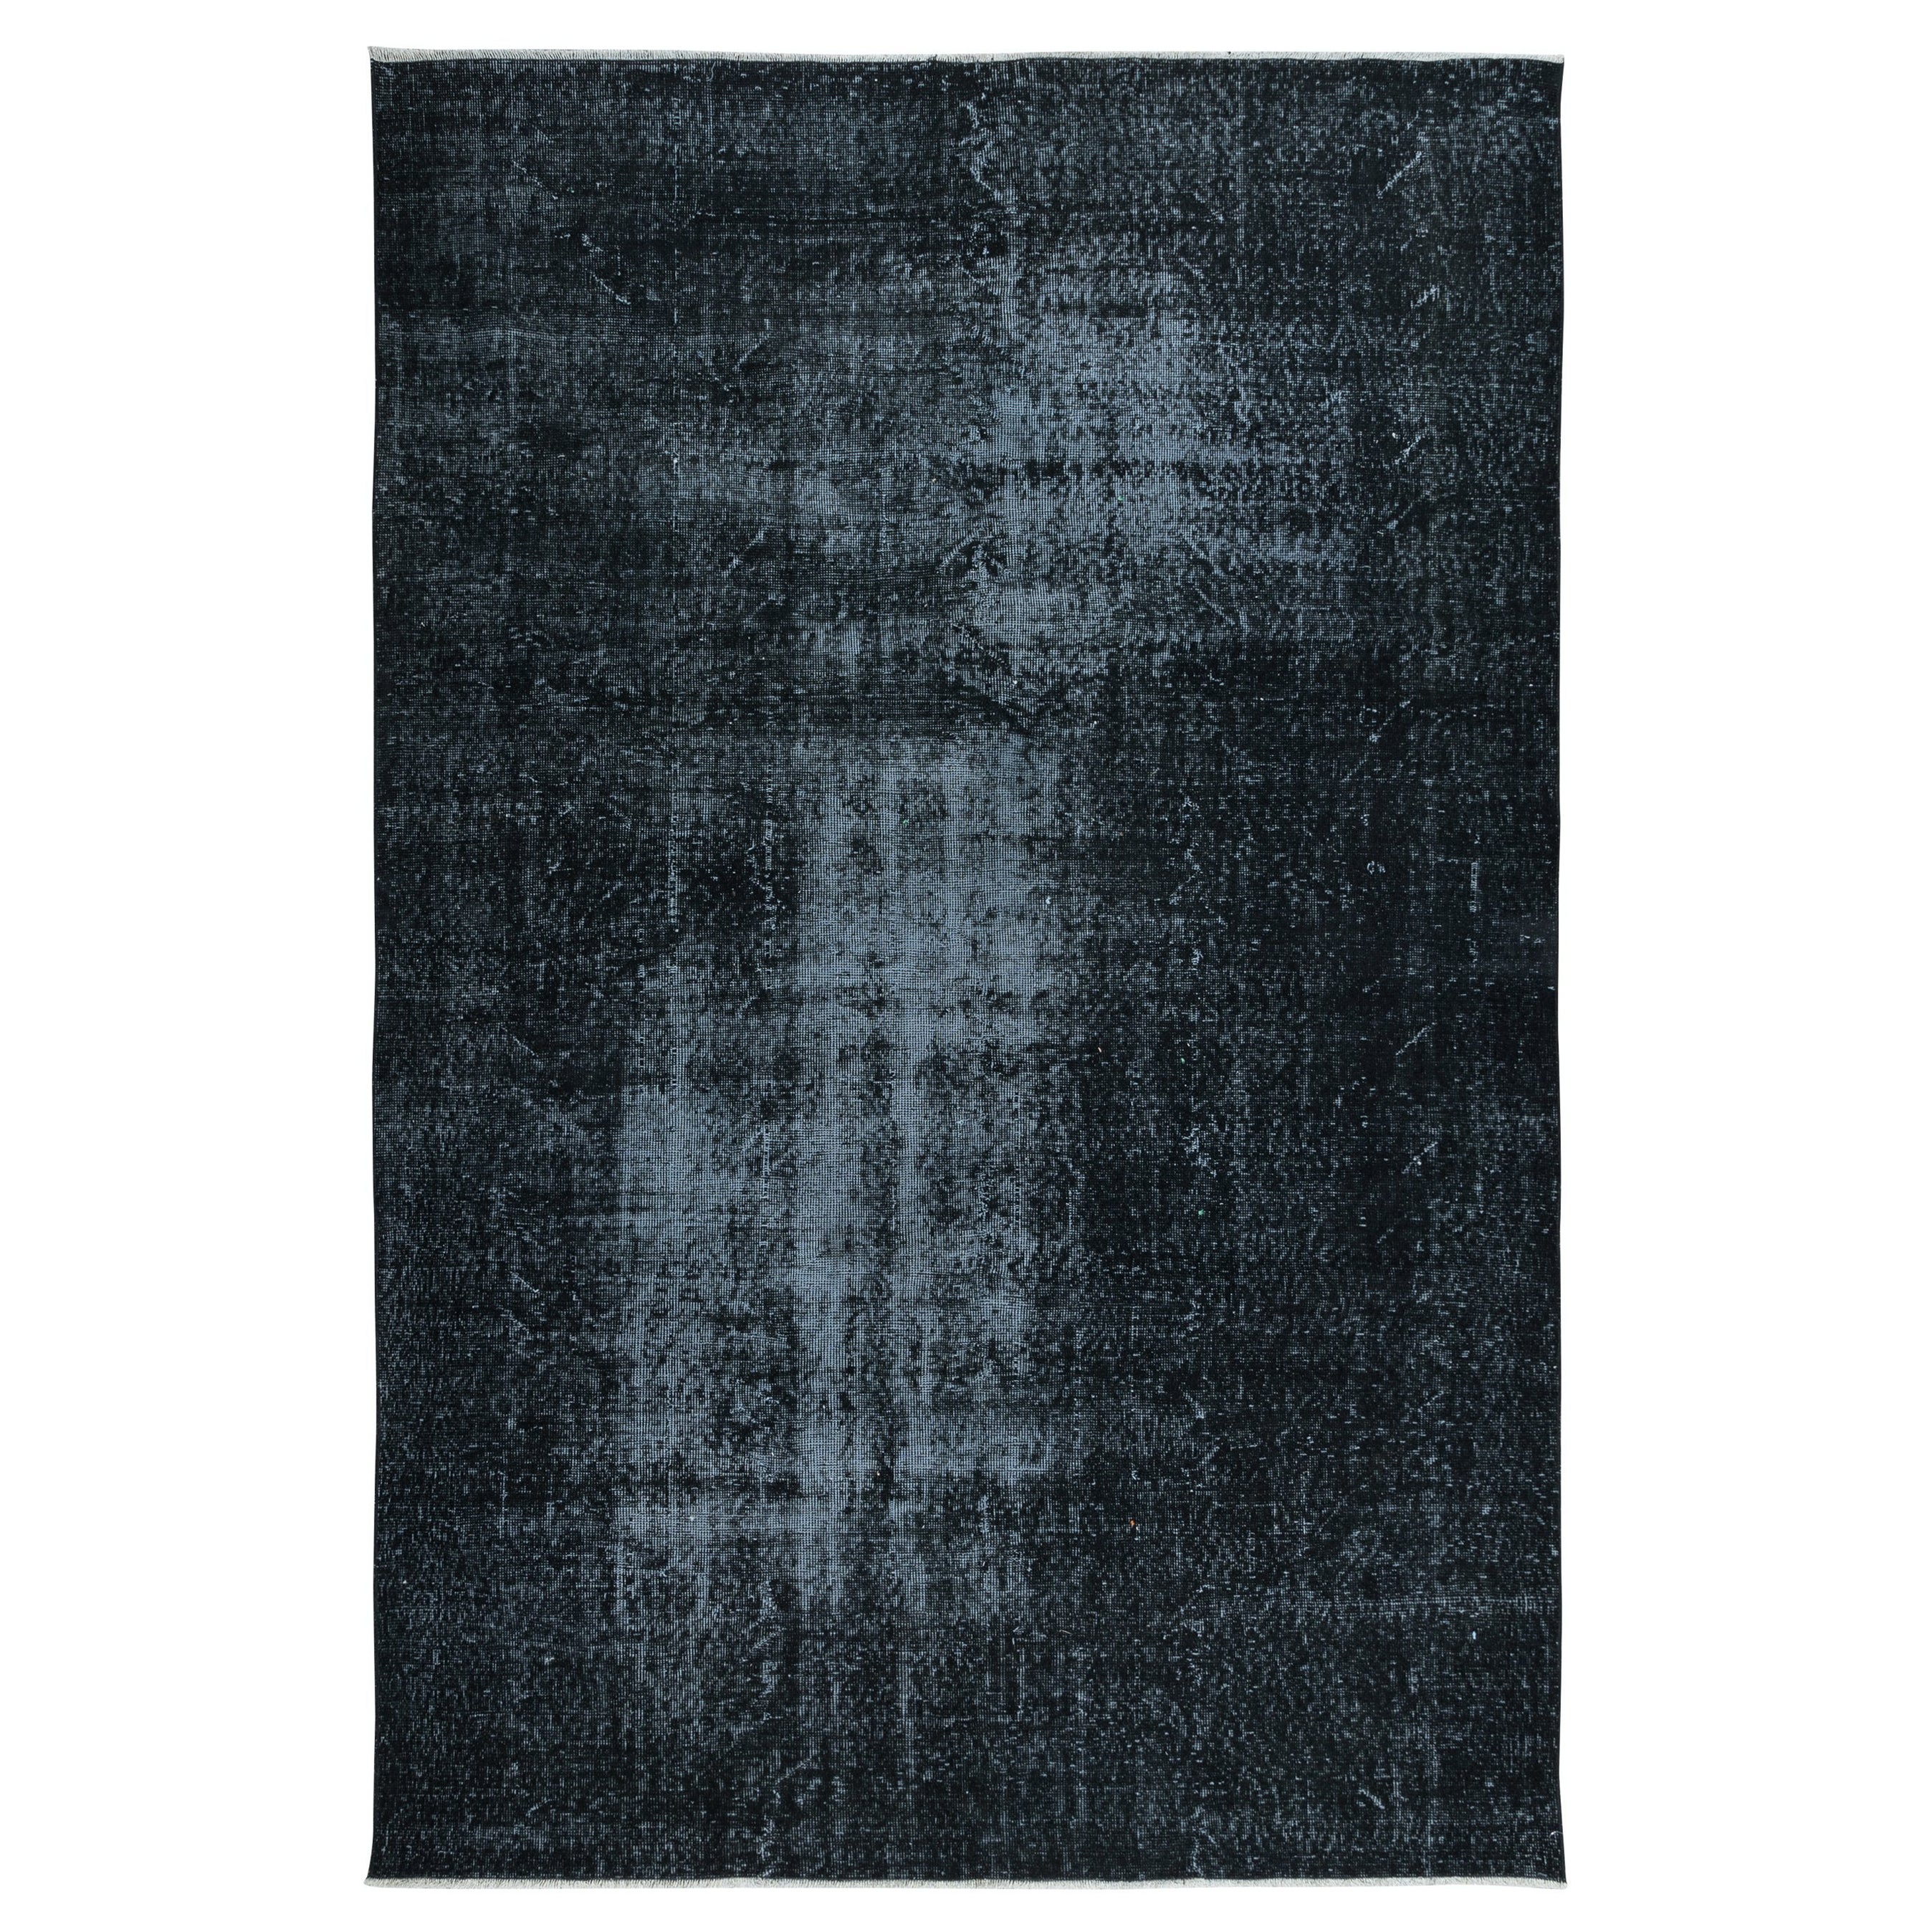 6.7x9.7 Ft Black Abstract Area Rug, Handmade in Turkey, Modern Upcycled Carpet For Sale